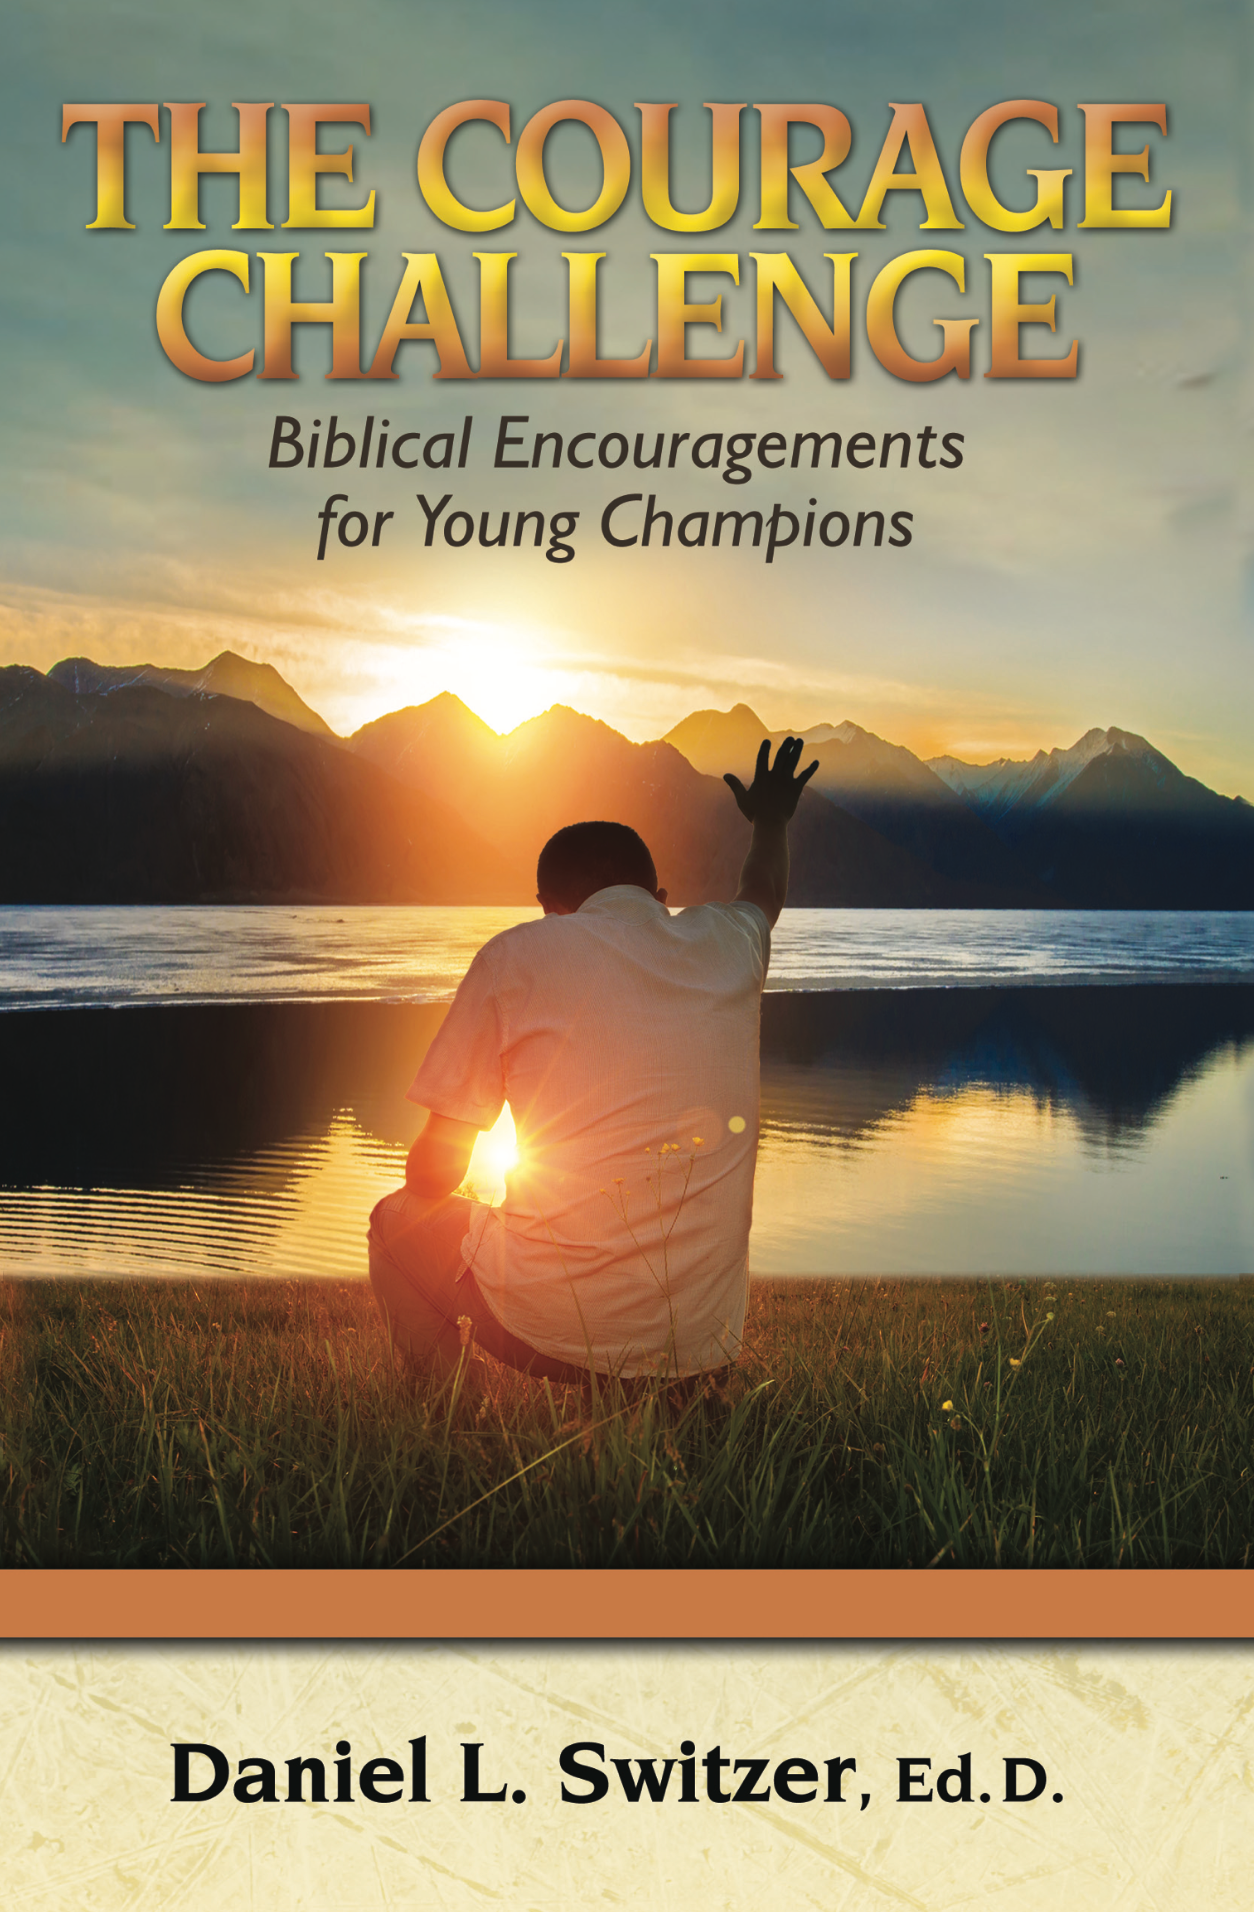 The Courage Challenge: Biblical Encouragements for Young Champions by Daniel L. Switzer, Ed.D.